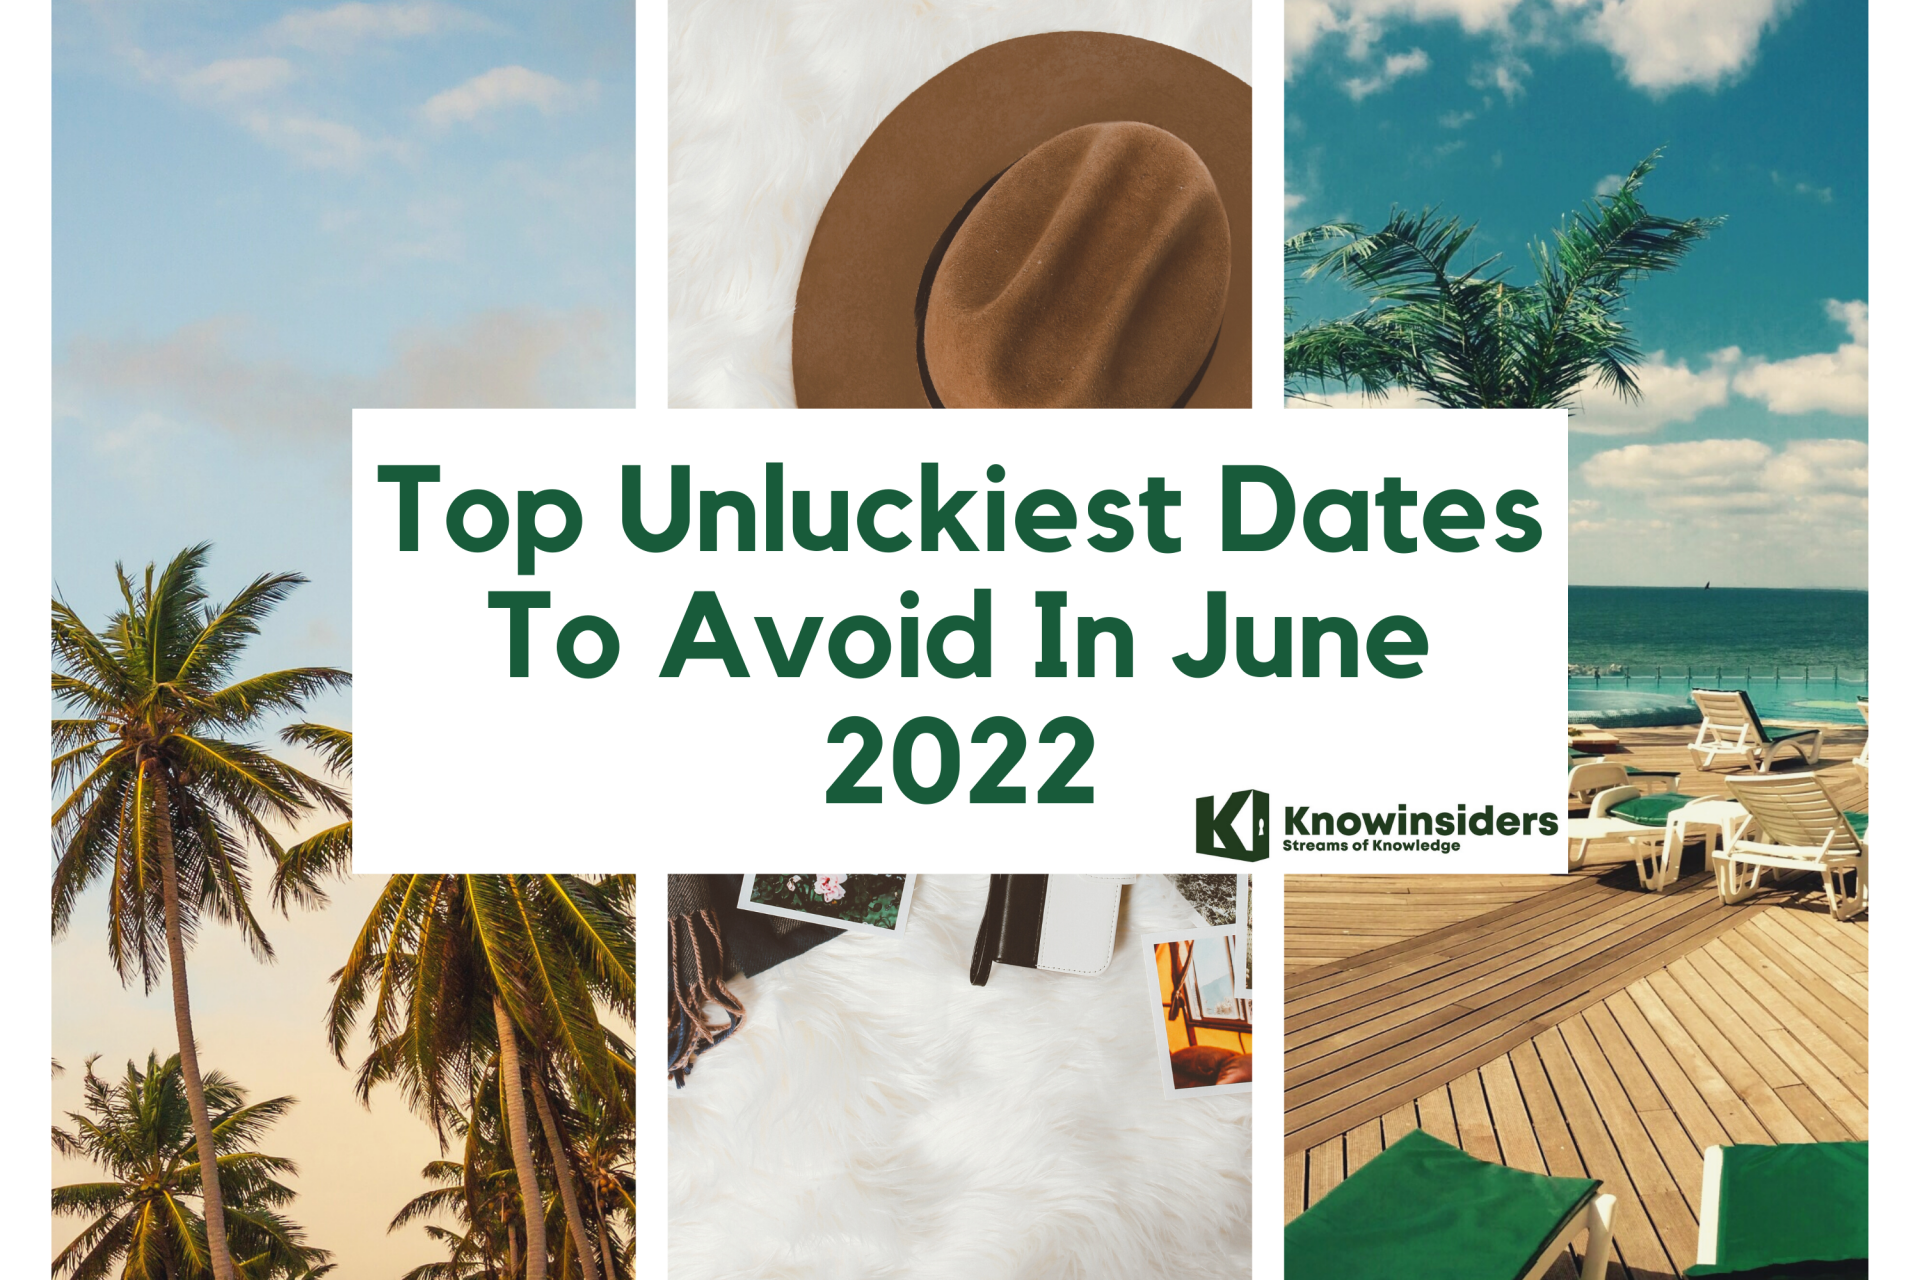 Top Unluckiest Dates To Avoid In June 2022 for Everything in Life